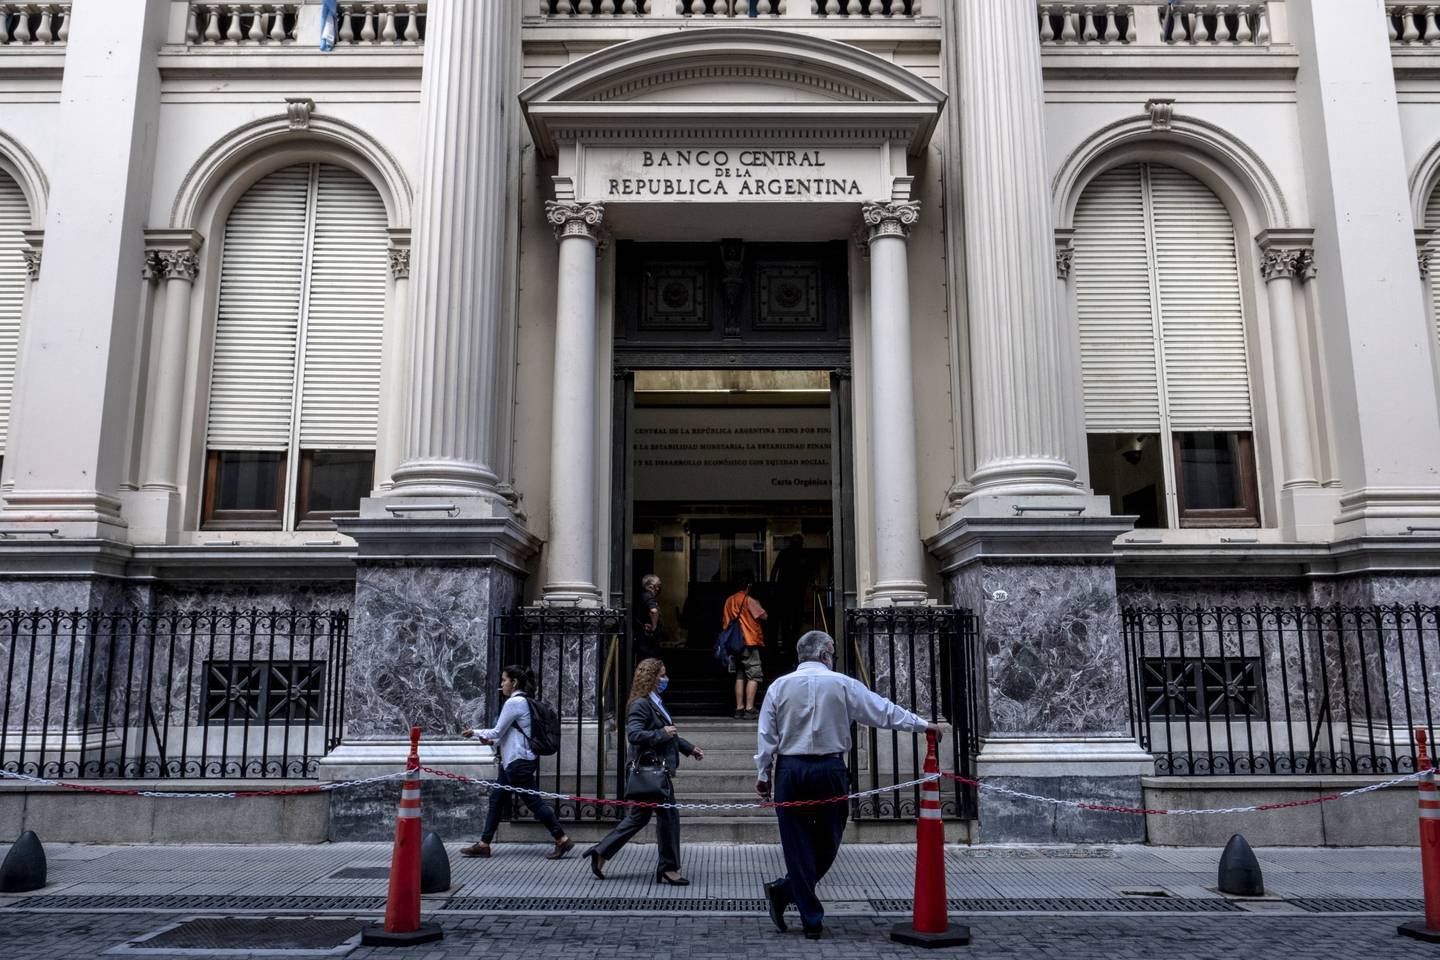 Argentina's central bank (BCRA) in Buenos Aires.dfd